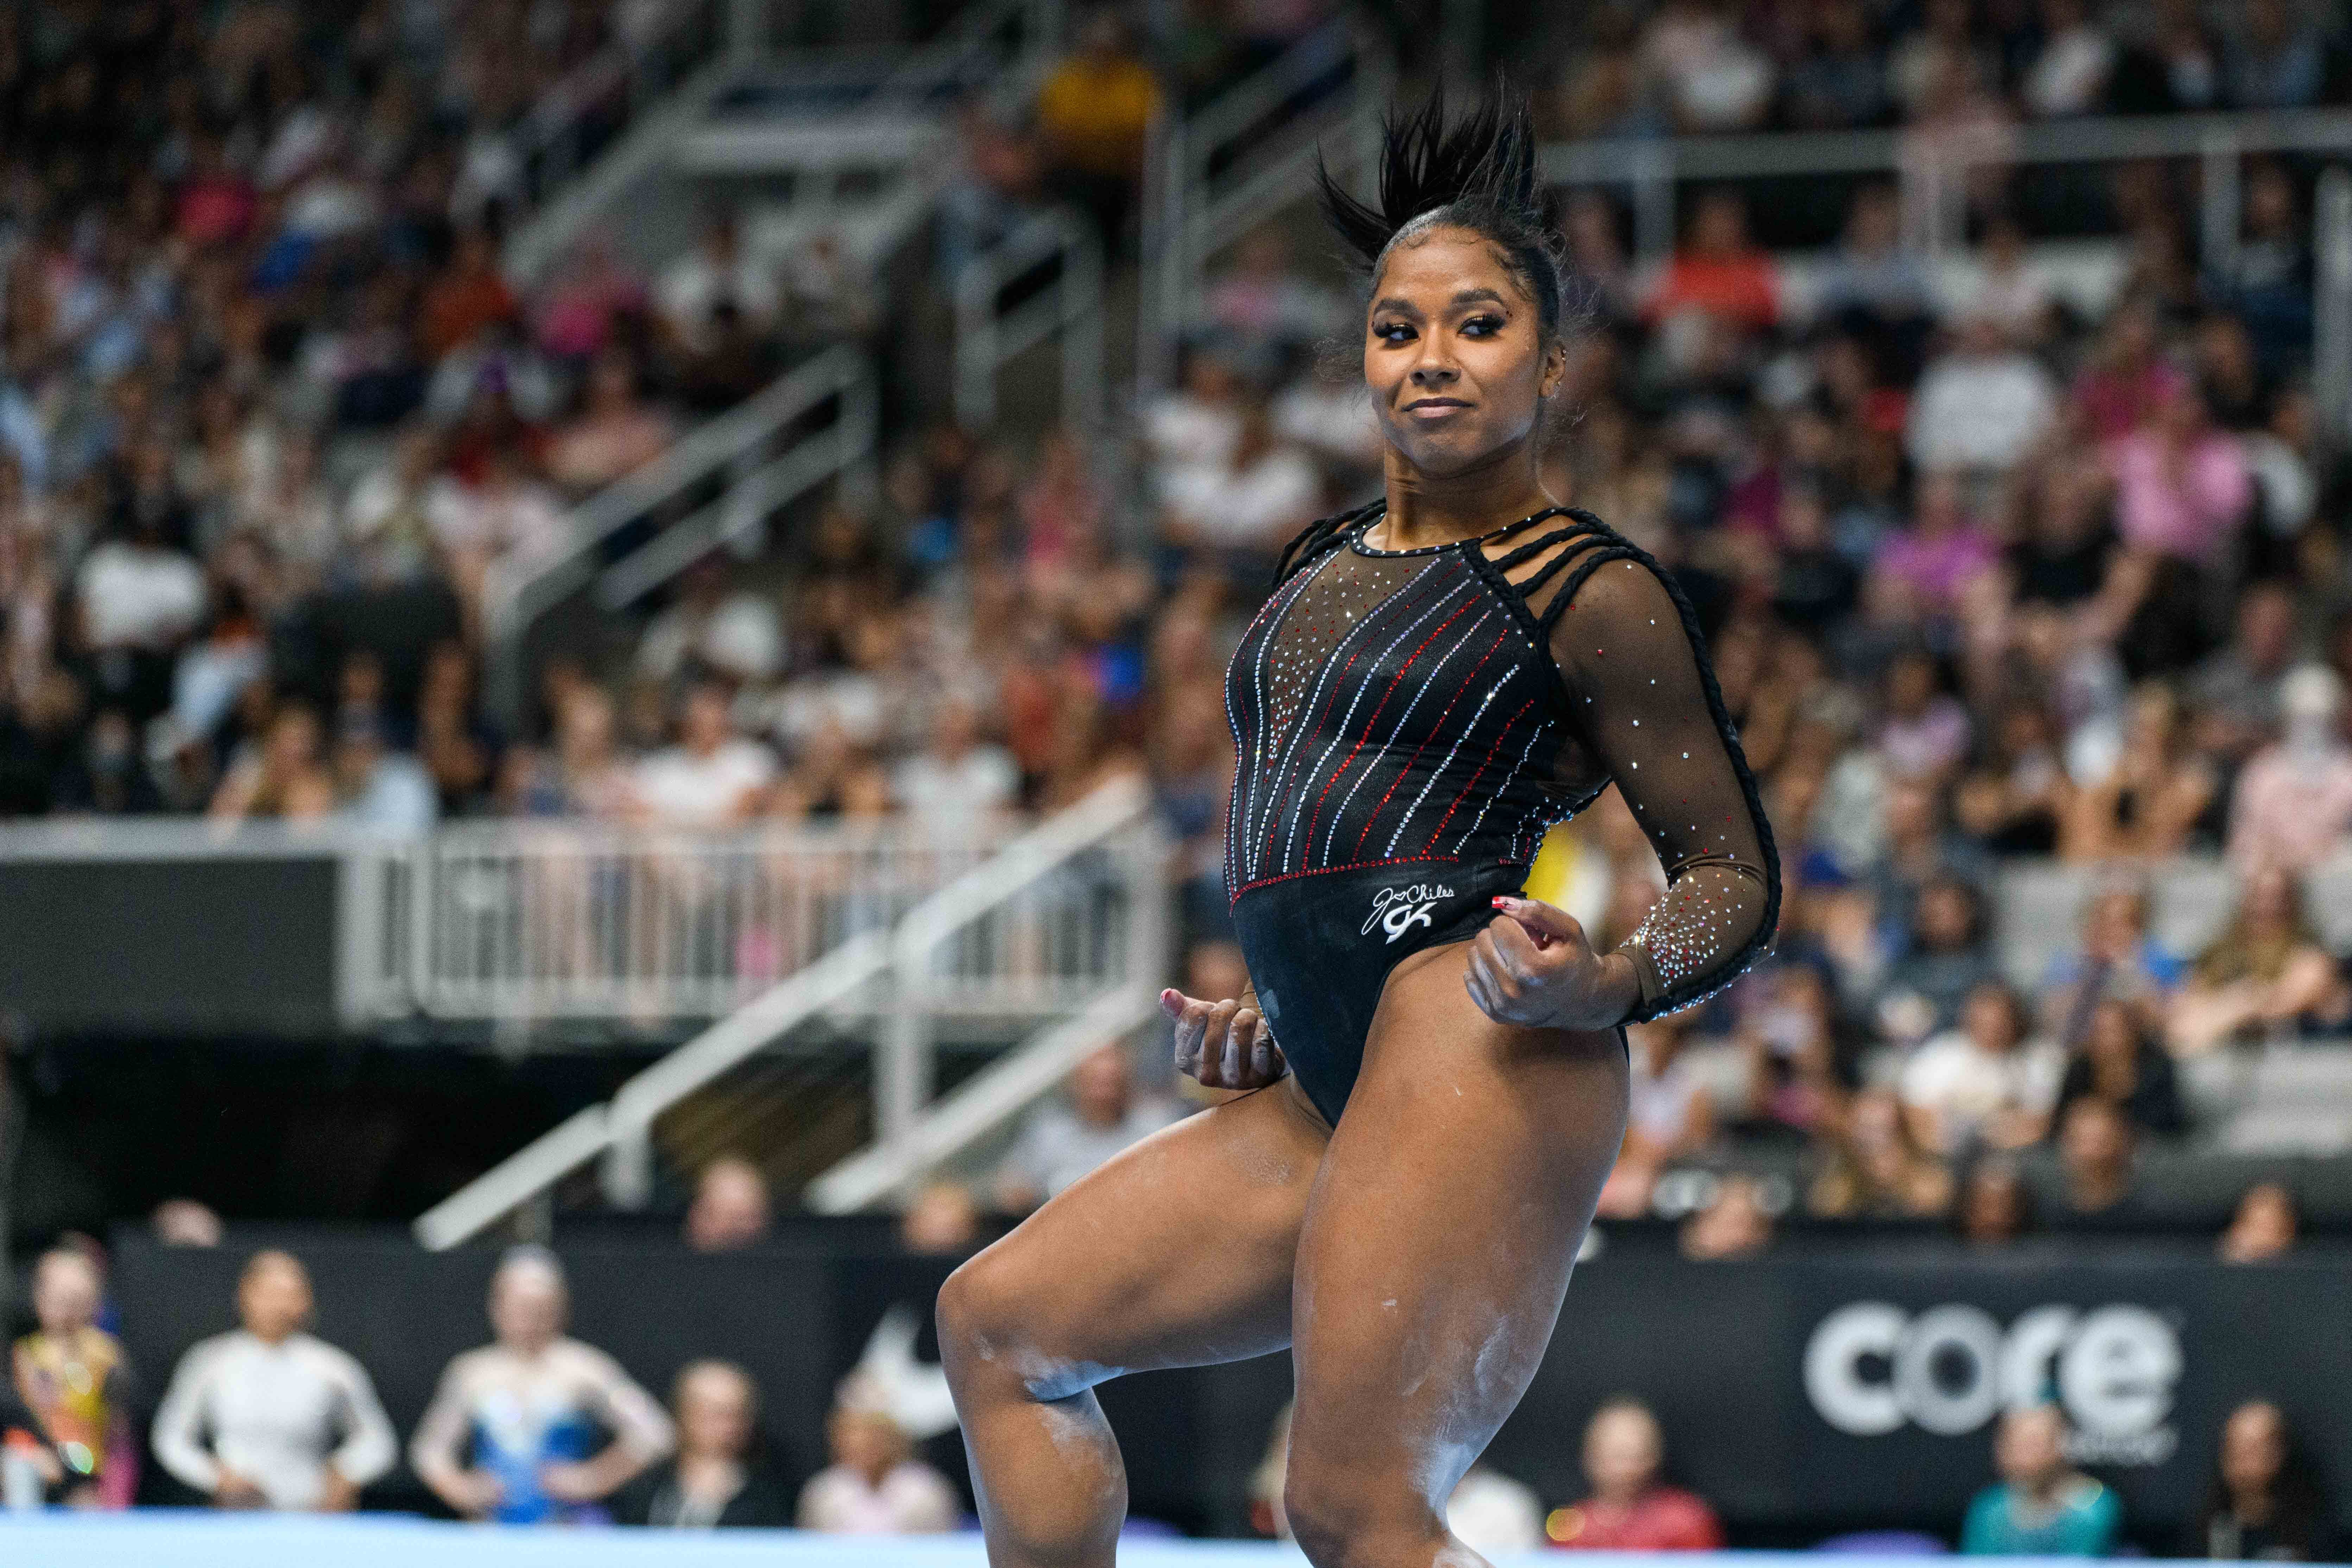 ‘It’s just going up from here’ Chiles competes in US Gymnastics